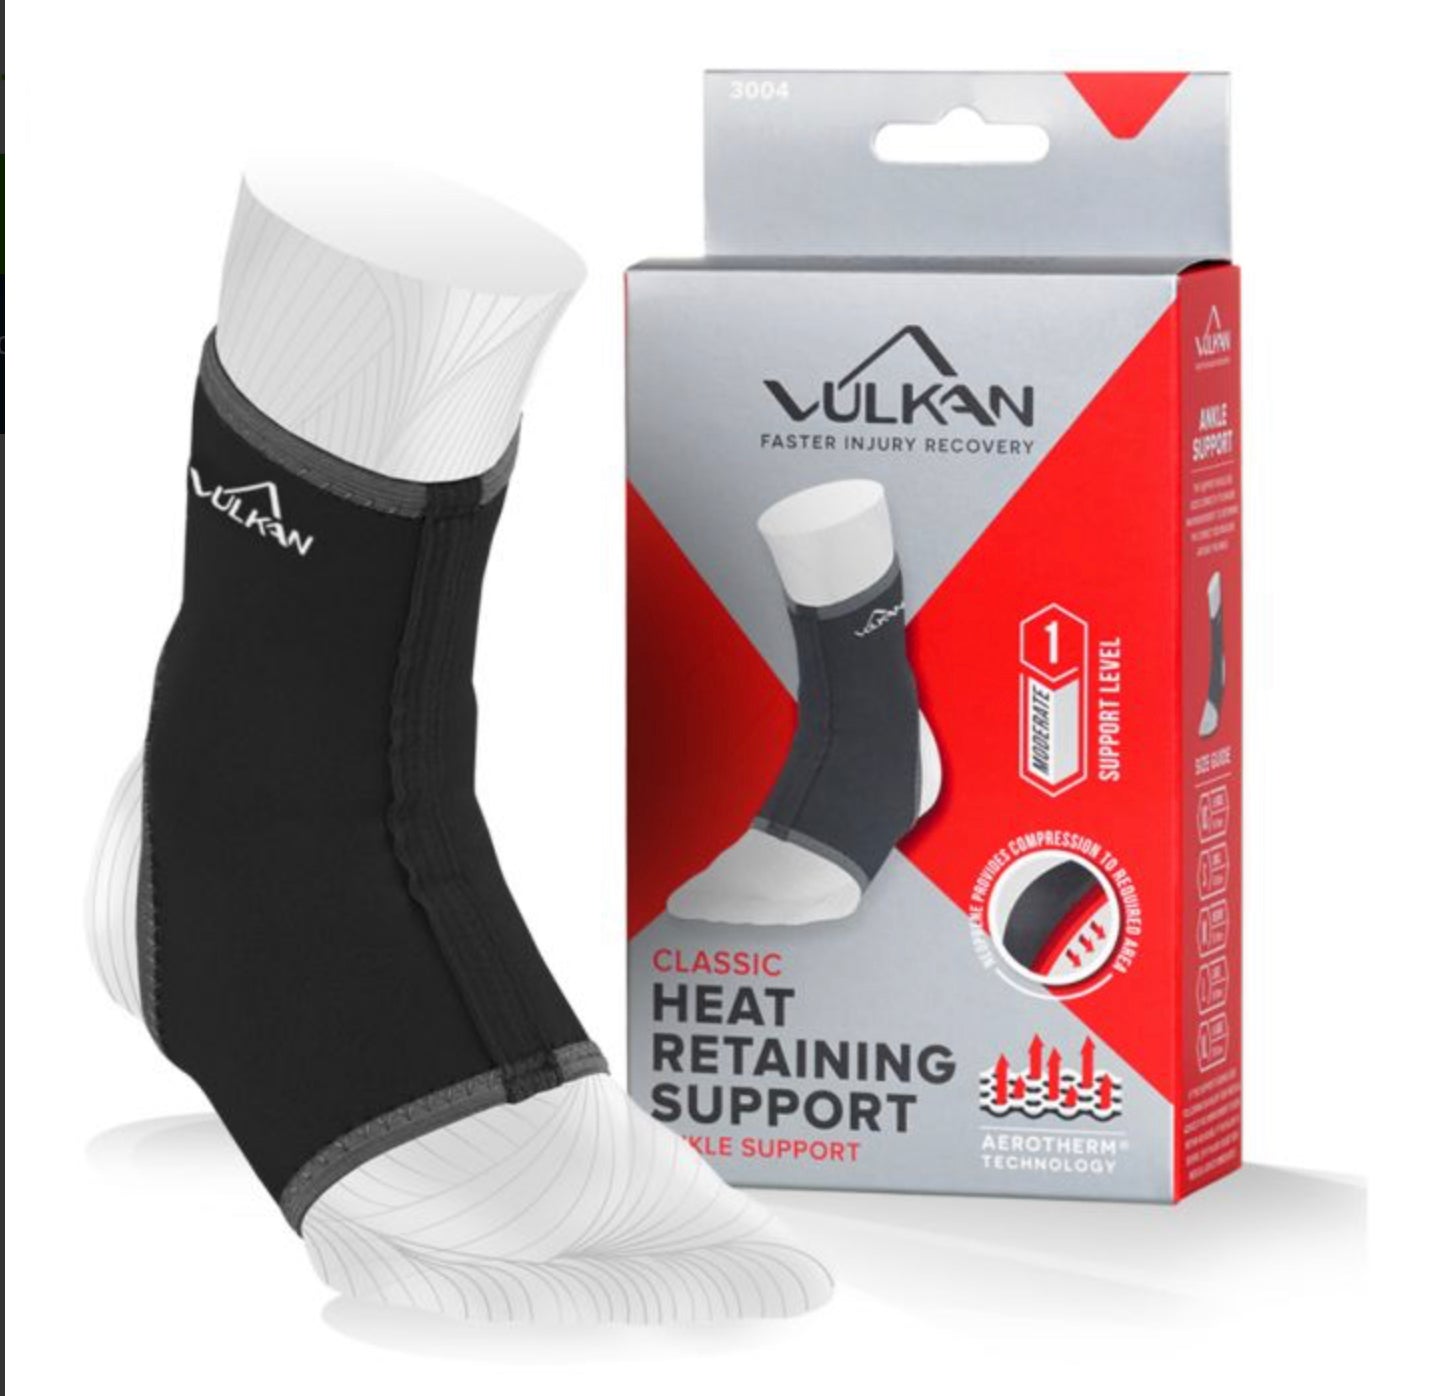 Vulkan Classic Heat Retaining Ankle Support